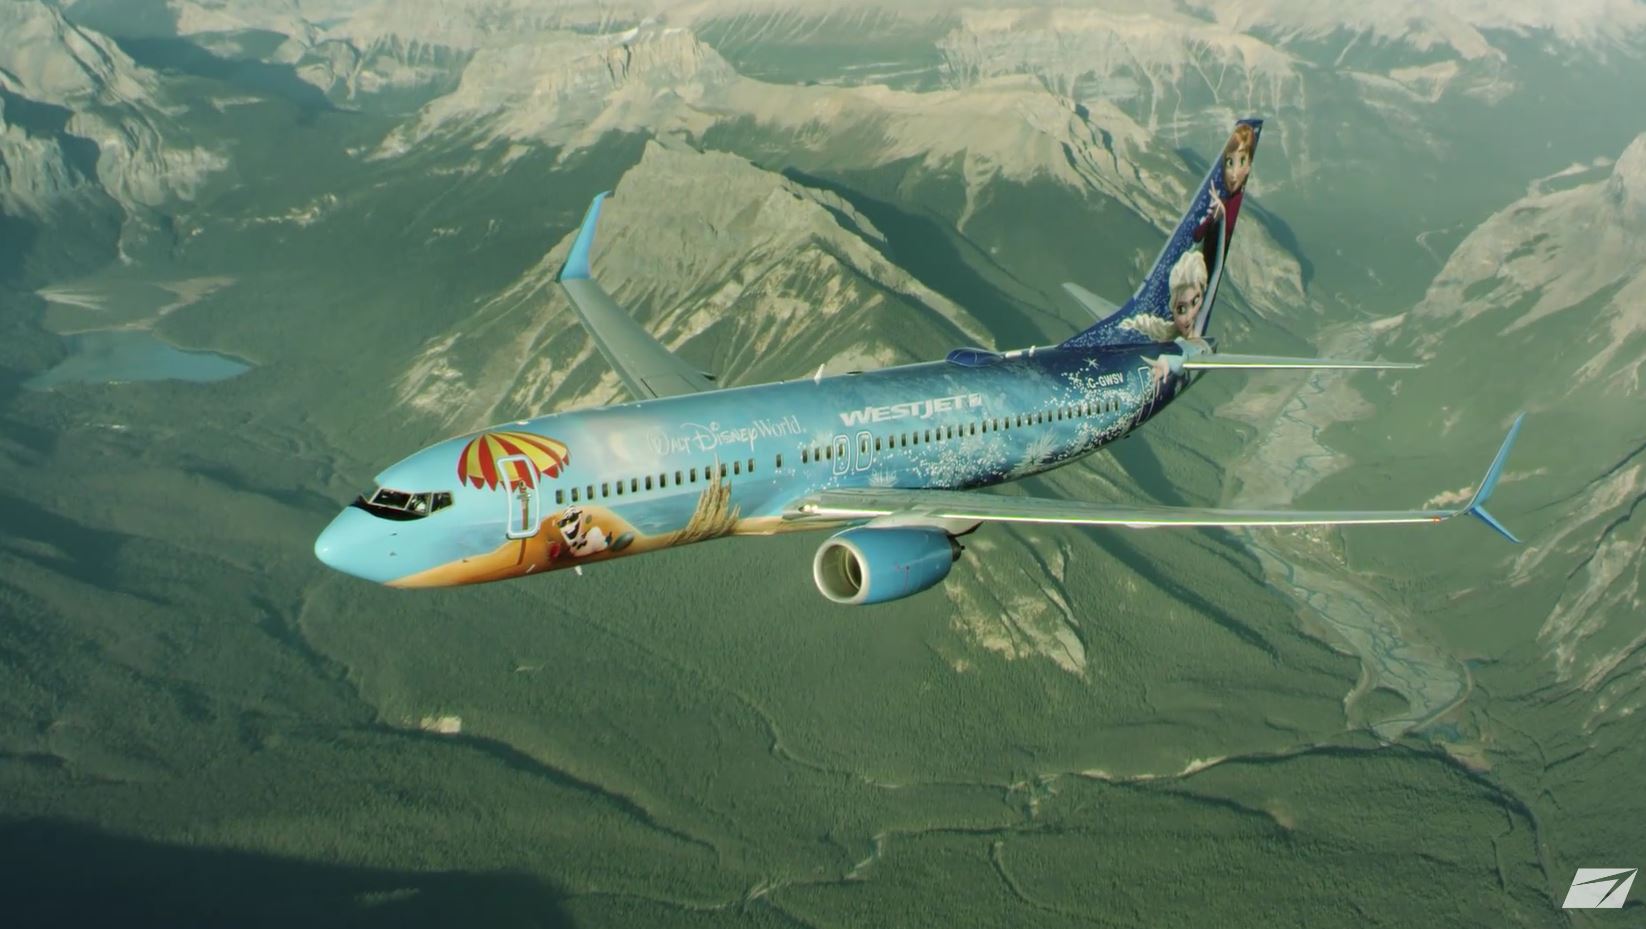 WestJet – Fly with the Disney Frozen-themed Plane